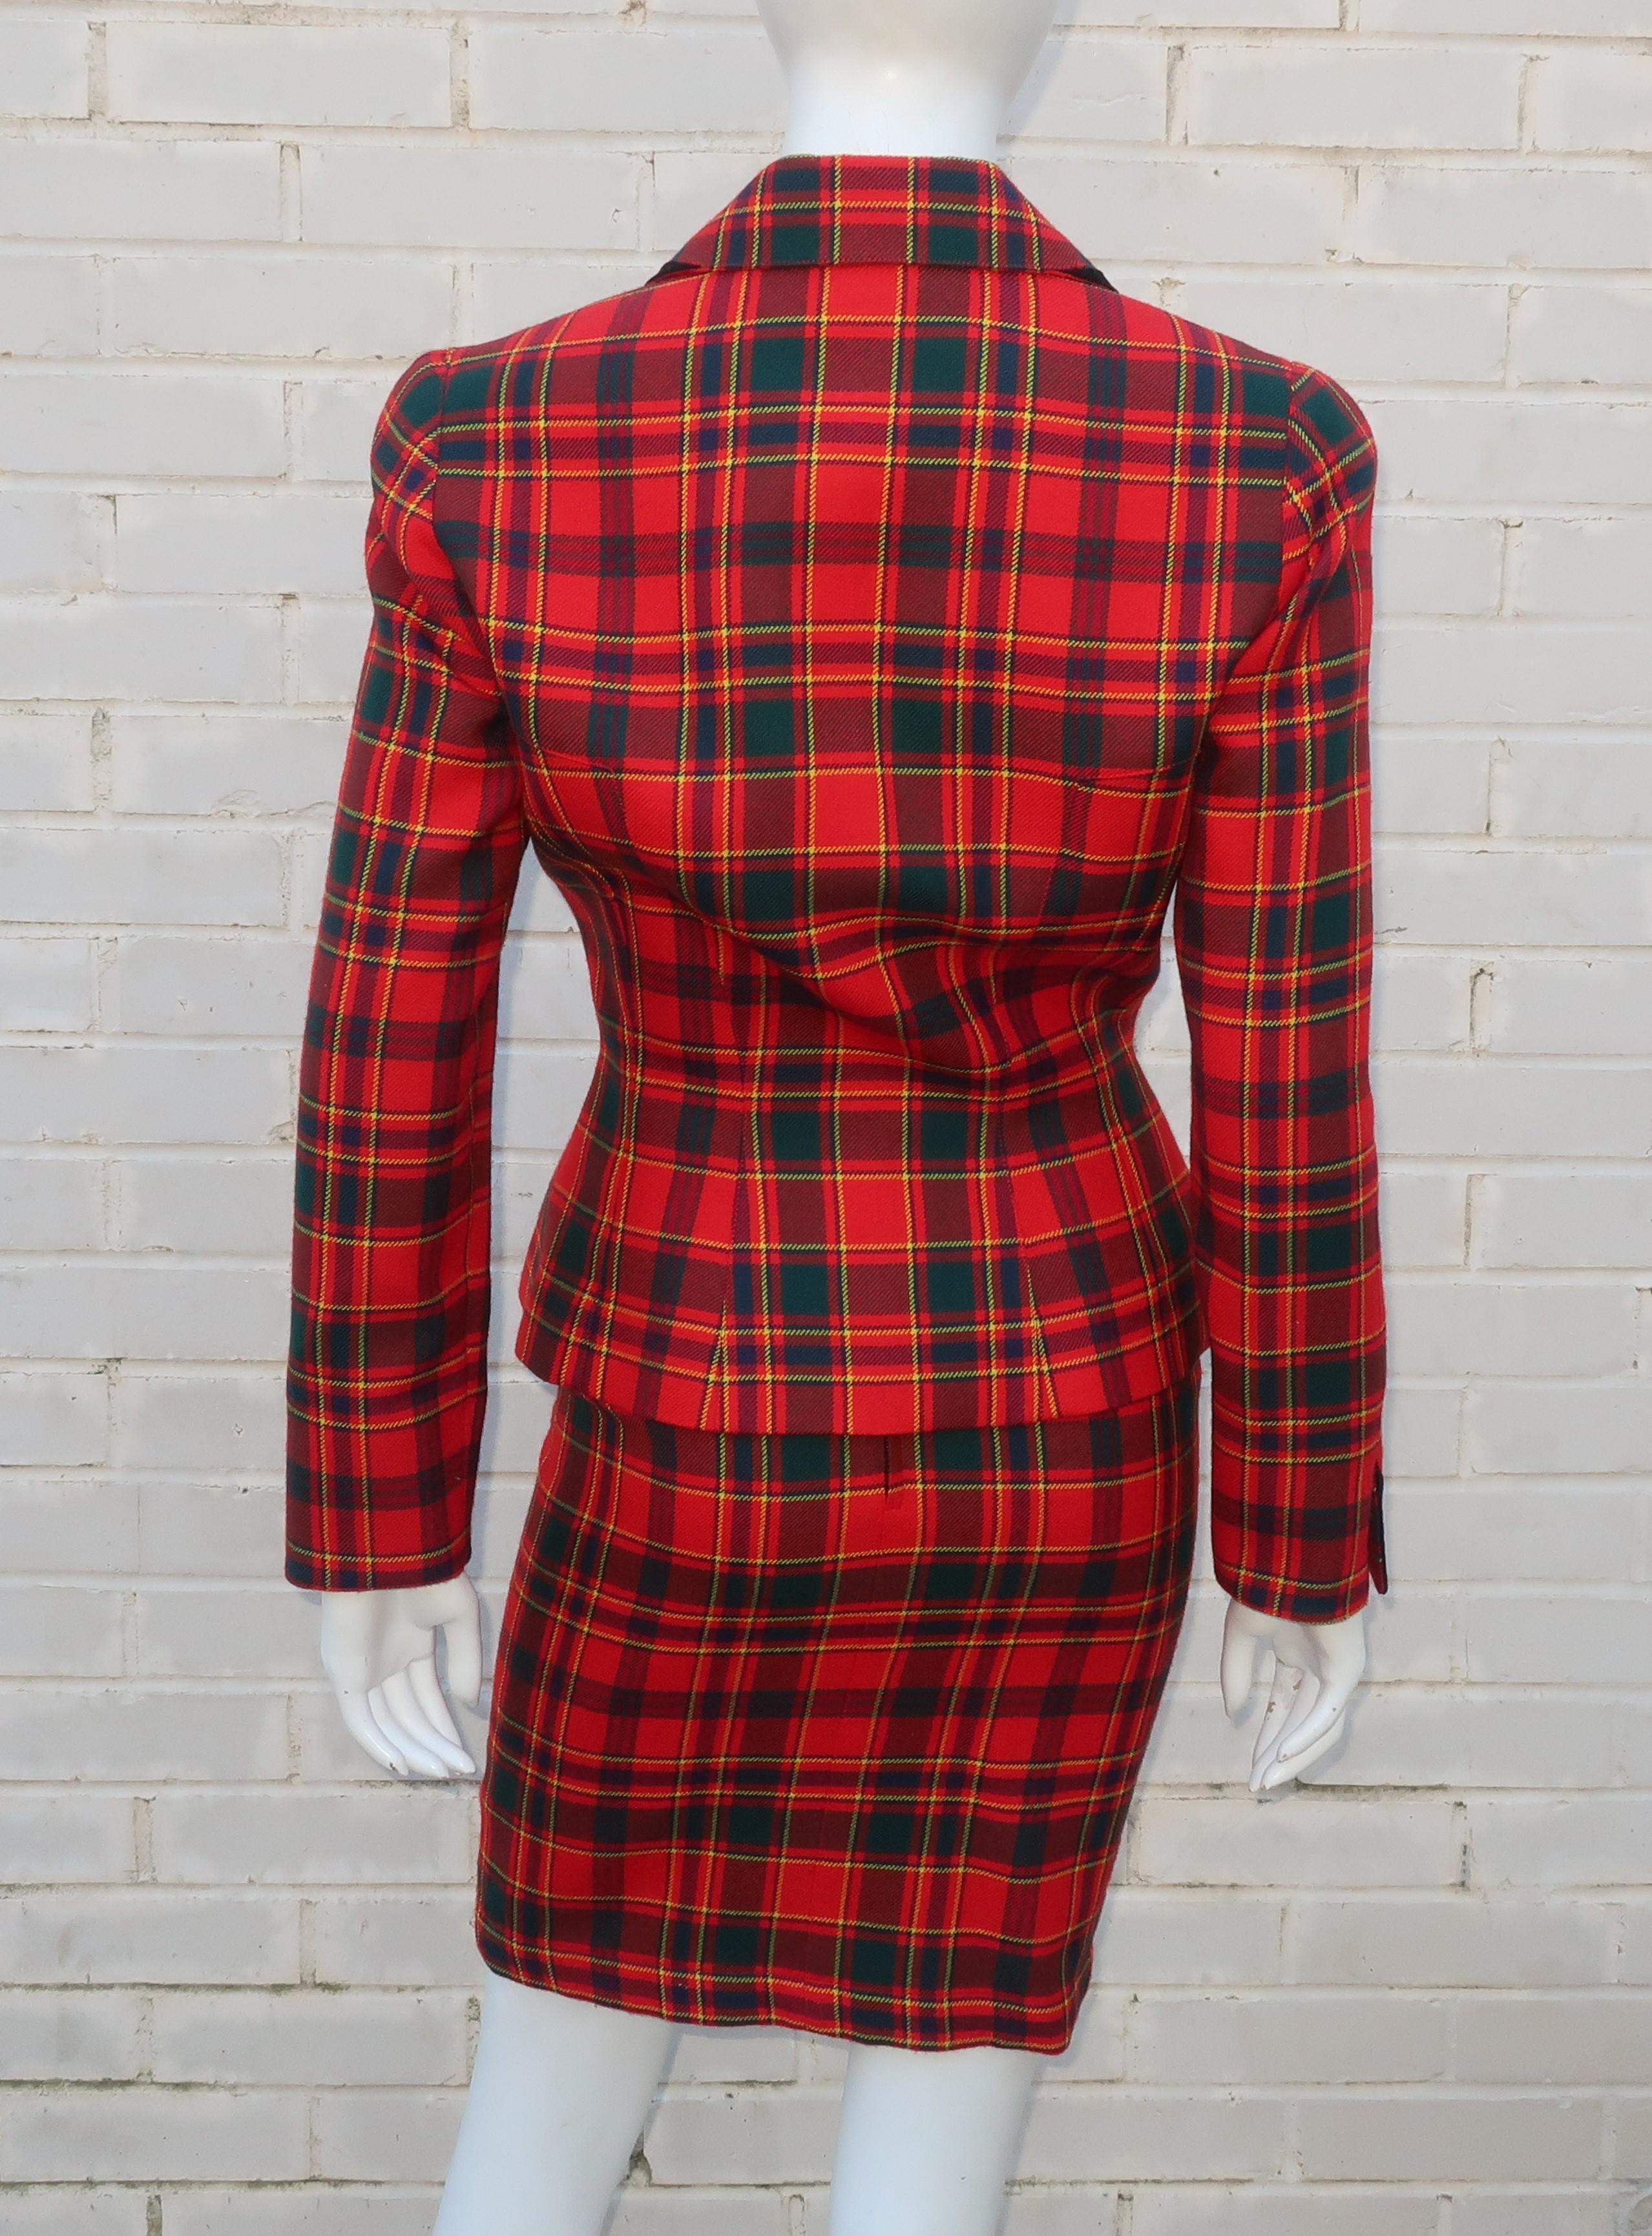 Thierry Mugler Red Plaid Suit With Black Velvet Trim 1